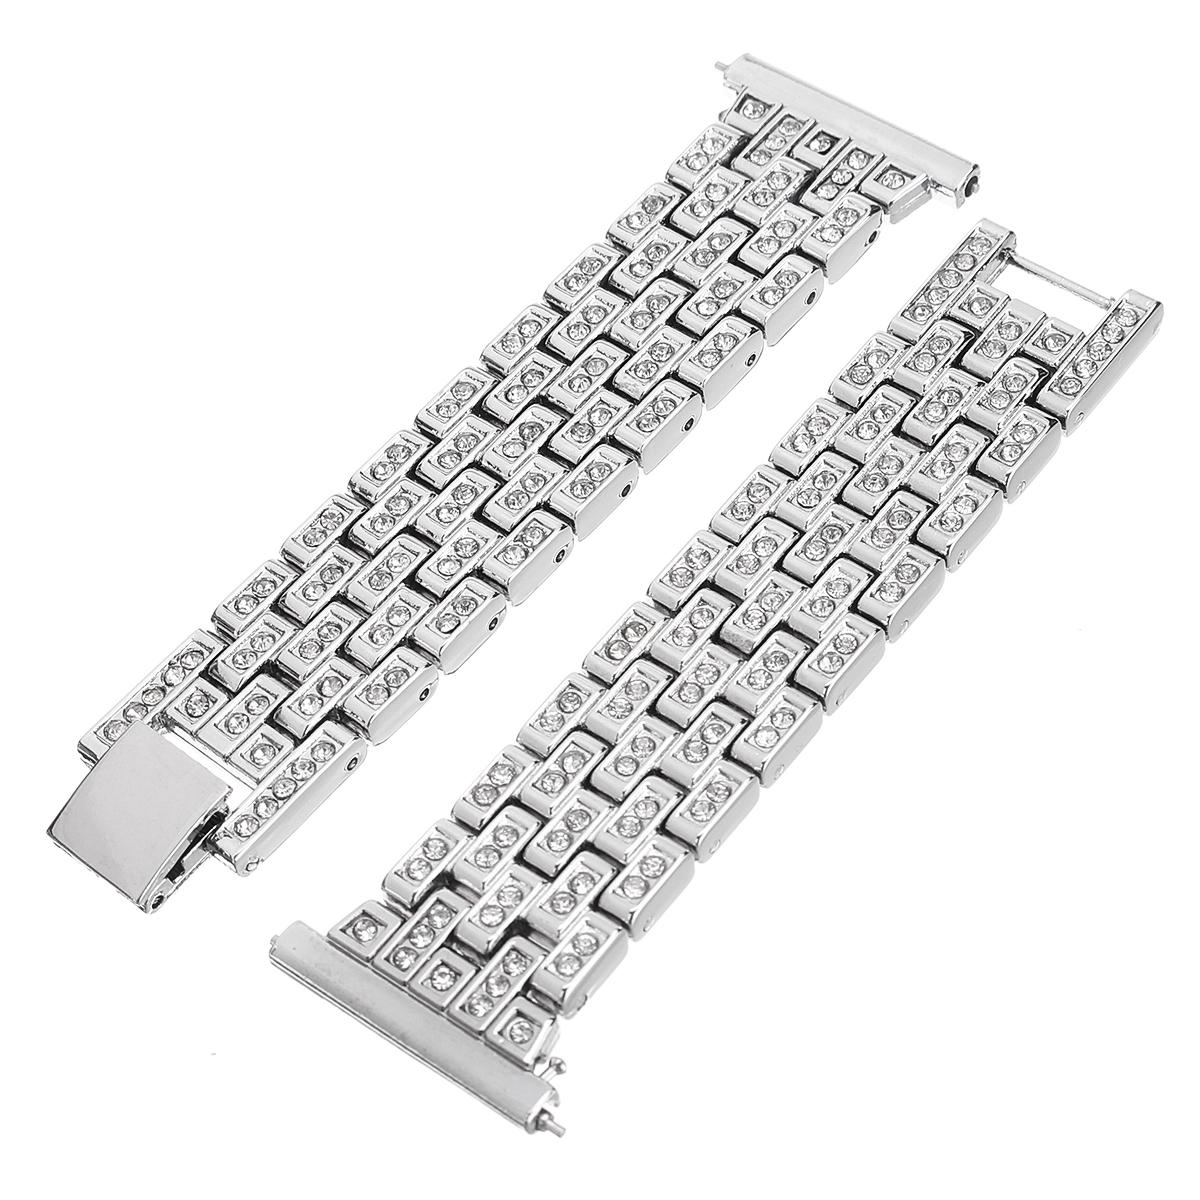 

12mm Replacement Stainless Steel Diamond Wrist Watch Band Strap For Fitbit Versa